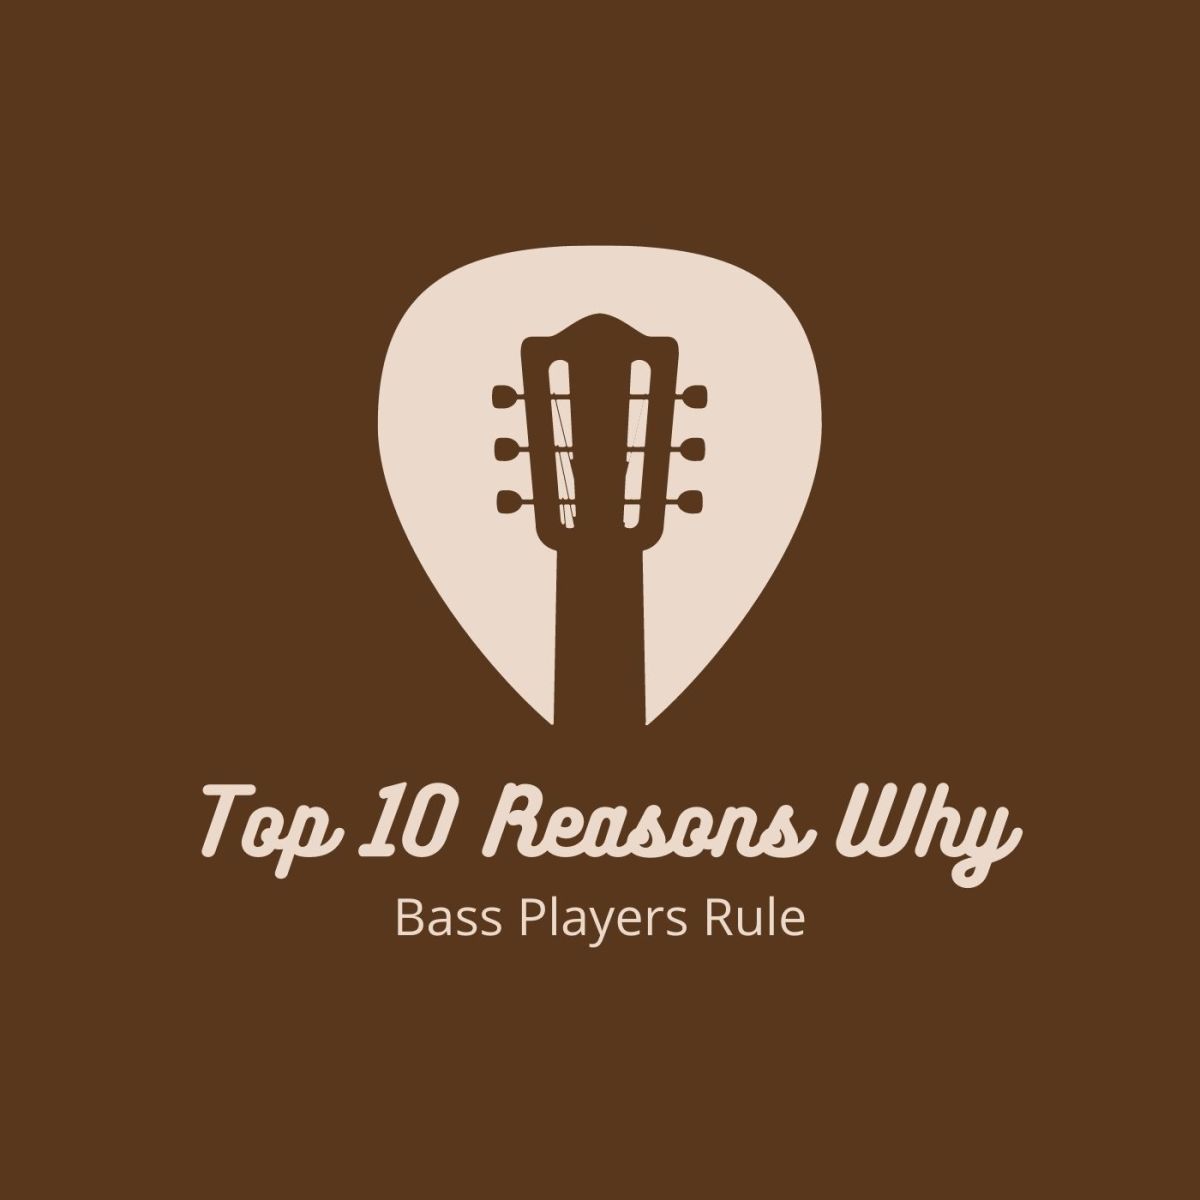 Top 10 Reasons Why Bass Players Rule